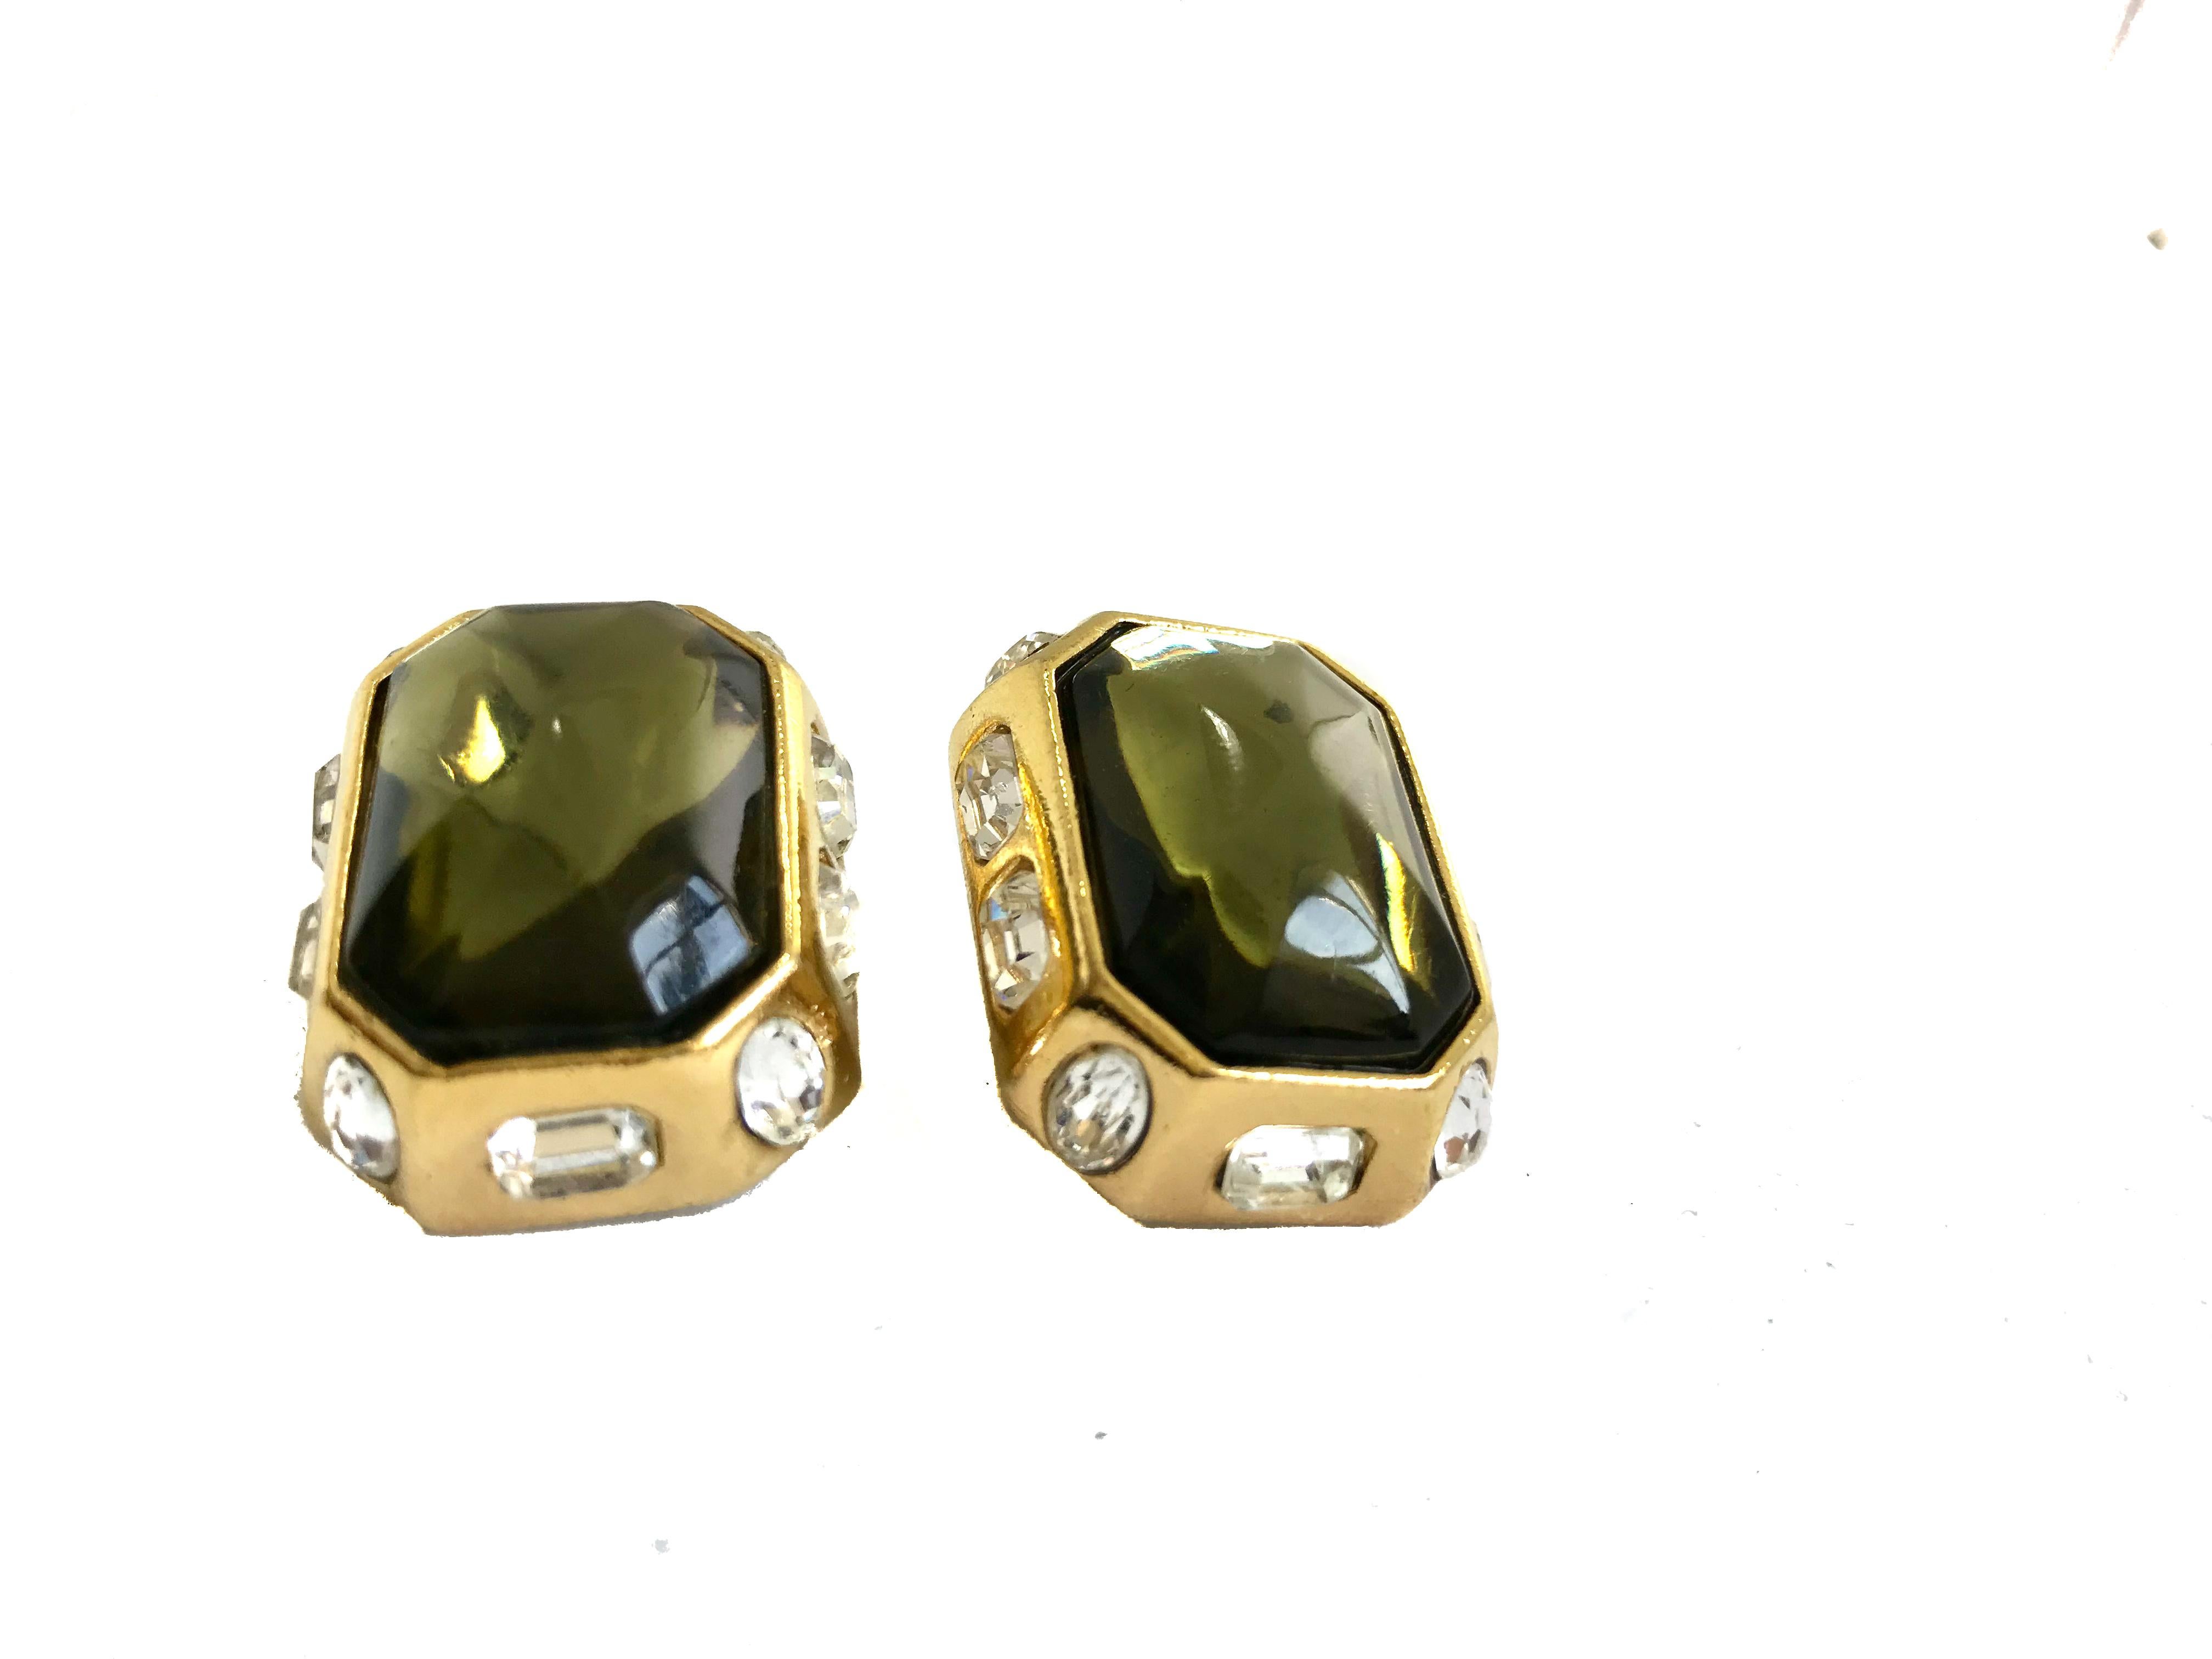 YSL 1980s Vintage Statement Clip On Earrings with large green stone and smaller crystals inset into the surrounding gold plated metal.

Turn heads with these classic showstoppers!
 
Excellent condition.

1 inches x 0.75 inches